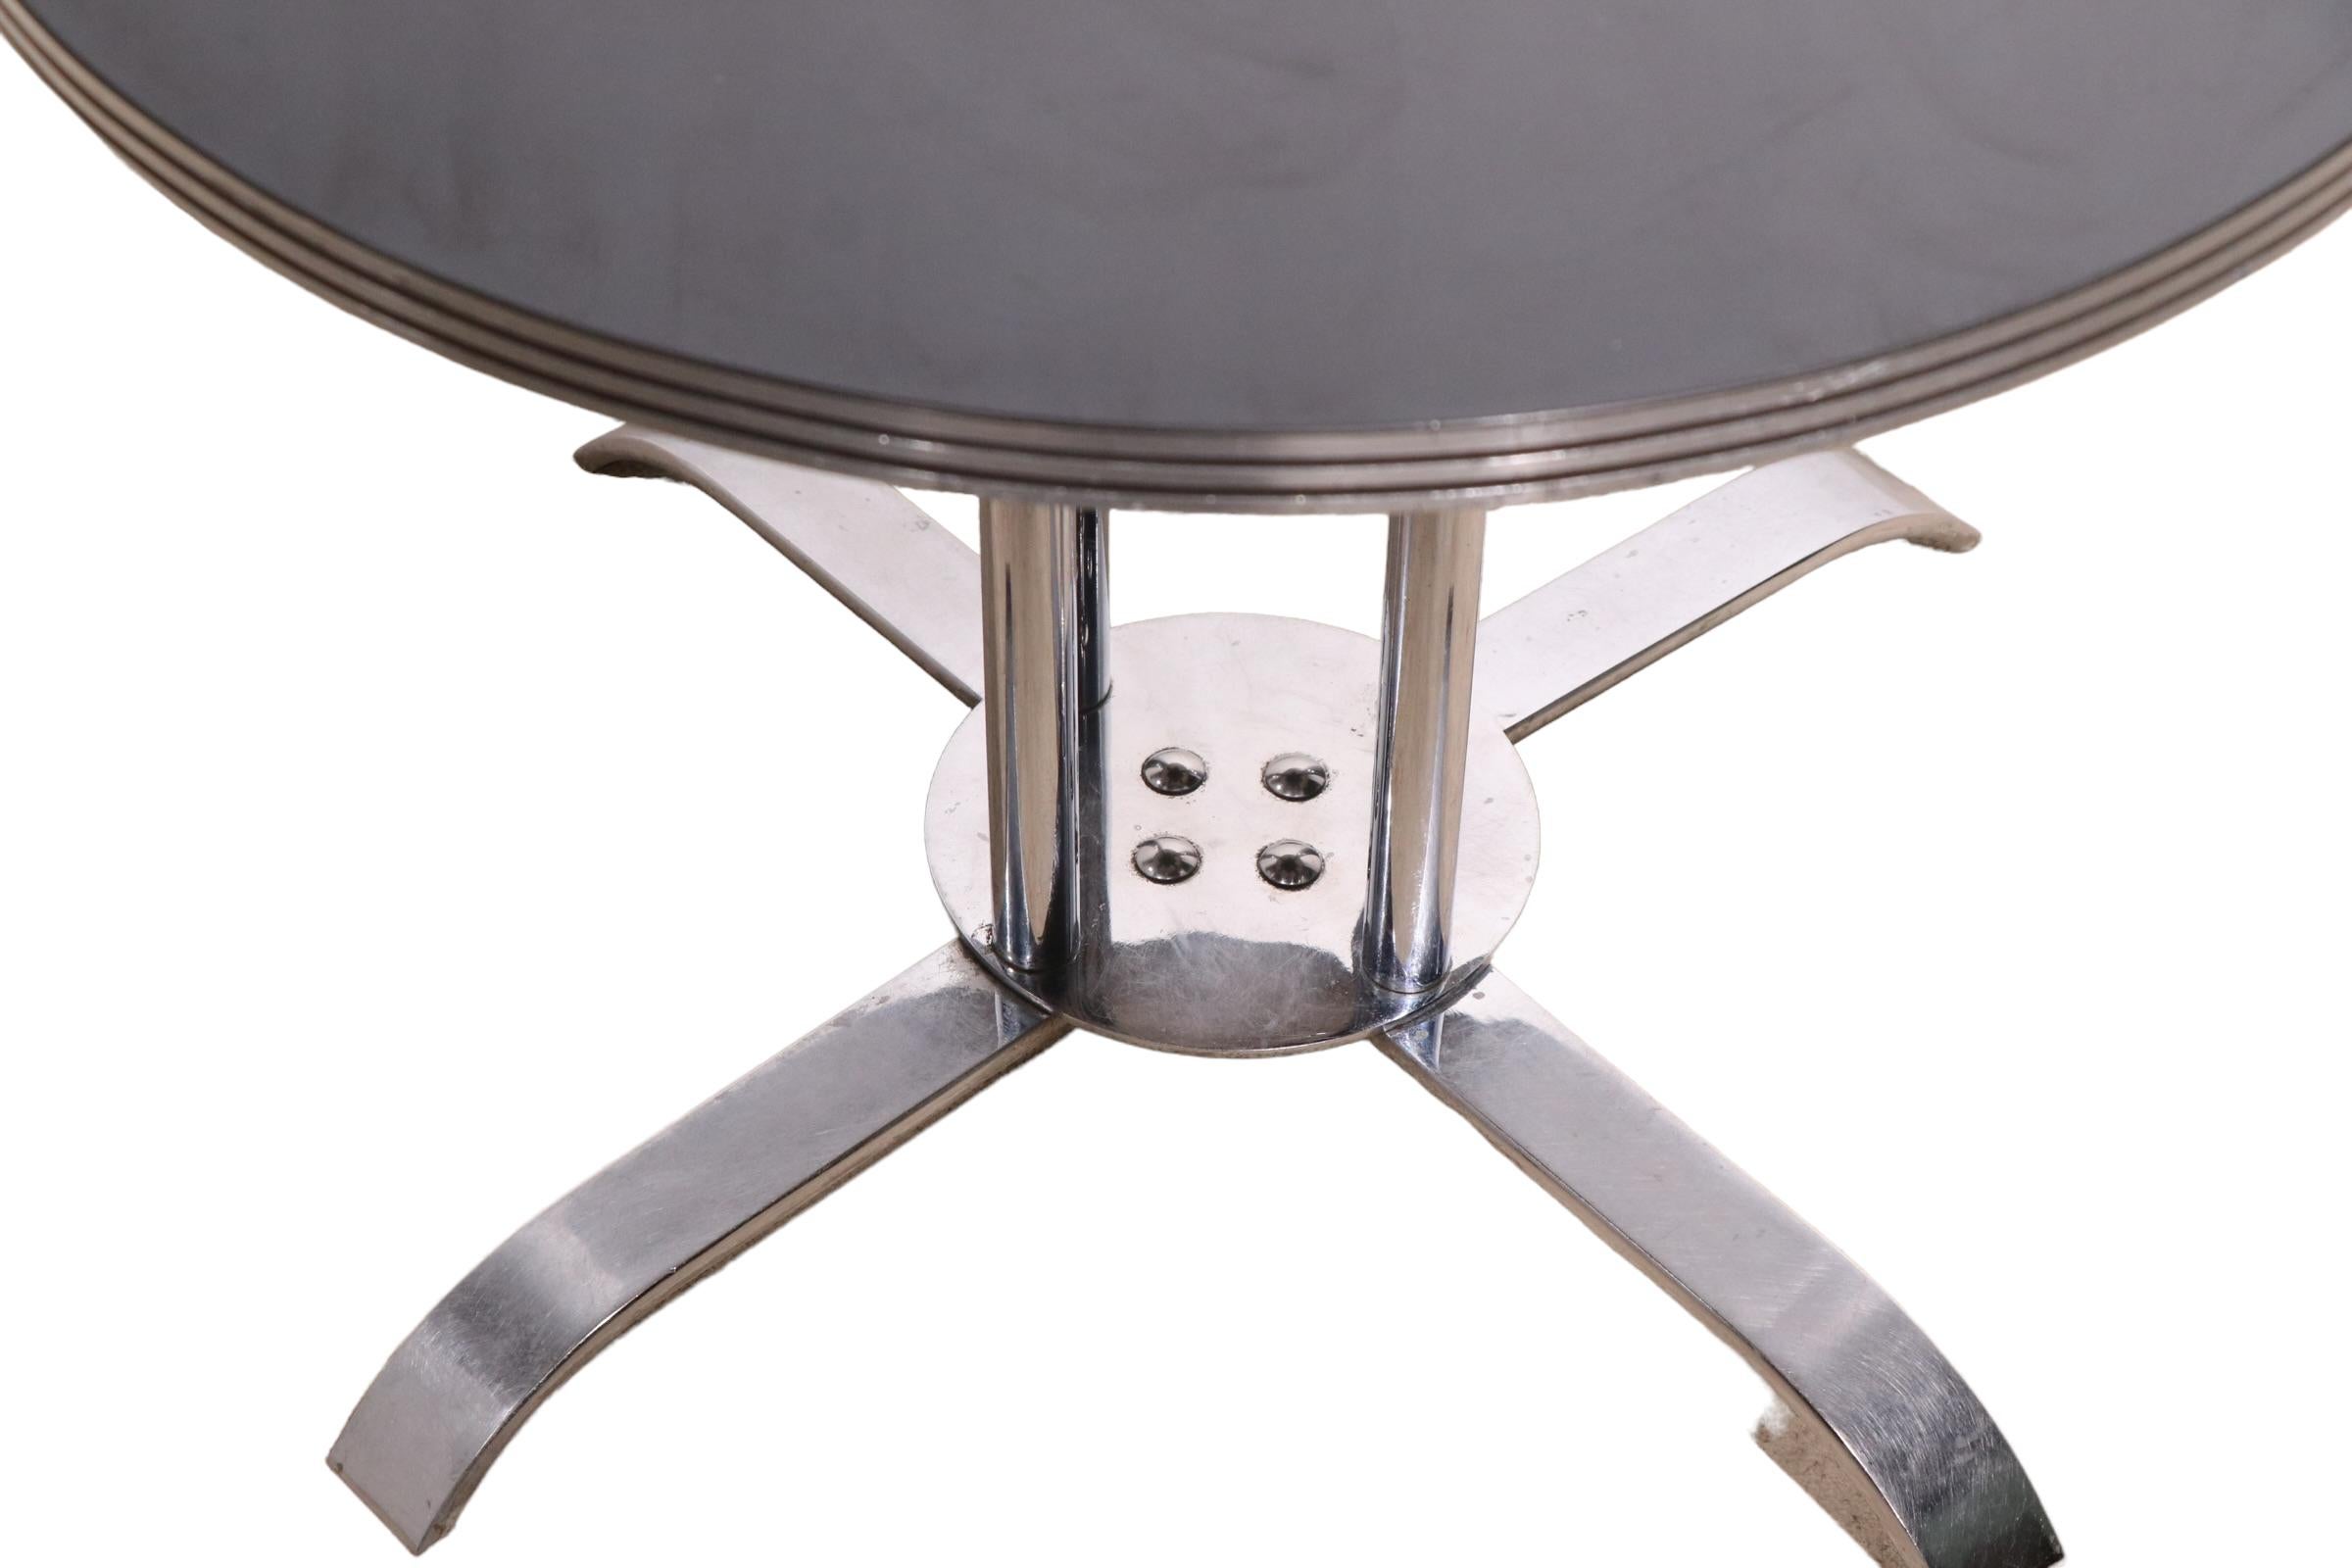 Milieu du XXe siècle Art Deco Machine Age Chrome Table by McKay Craft Furniture Made in USA c 1930's en vente